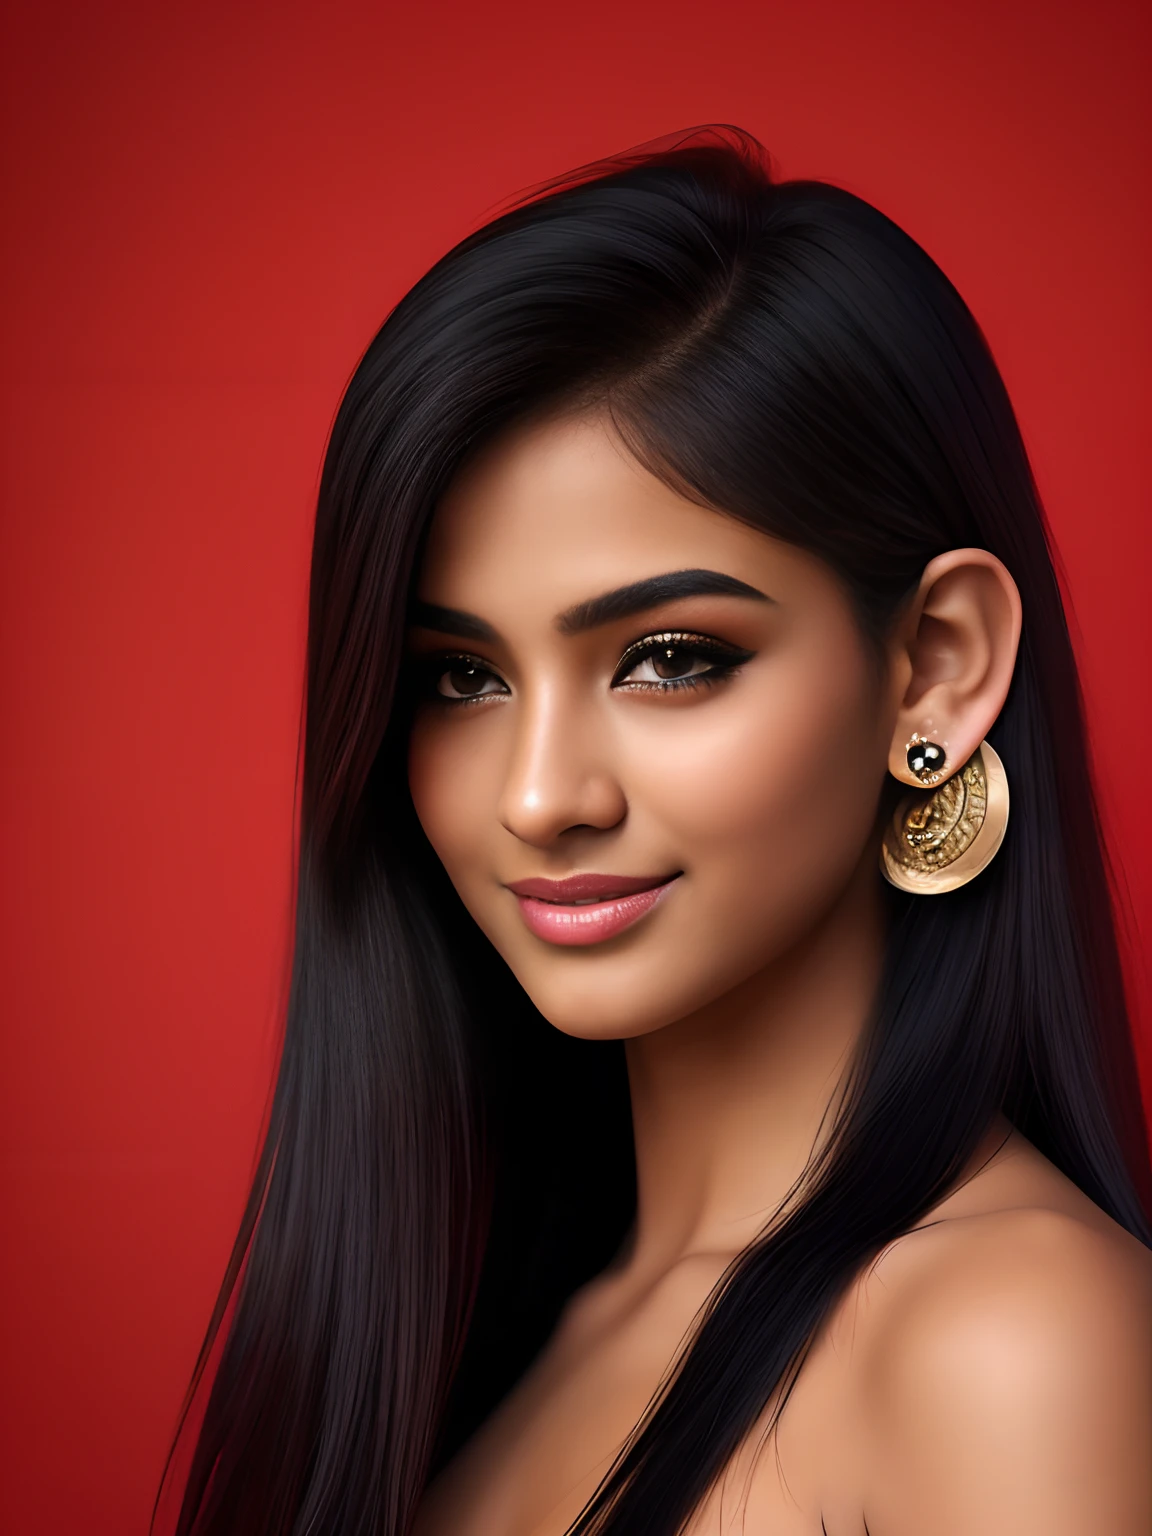 imagine a photoshoot inside studio, (ultra realistic:1.37), (extremely believable:1.6 picture) (intricate beautiful details of faces & eyes & ears & nose & lips & skin & body parts), of a beautiful 18 years old brown Tamil girl with long black hair normal breasts, (happy face) (cute expressions), magnanimously covered outfits, clever makeup, quality clothing brands with masterpiece designs, stylish footwears, (realistic:1.2 background), minimal ornaments, vibrant colors, highquality lighting, cinematic effects